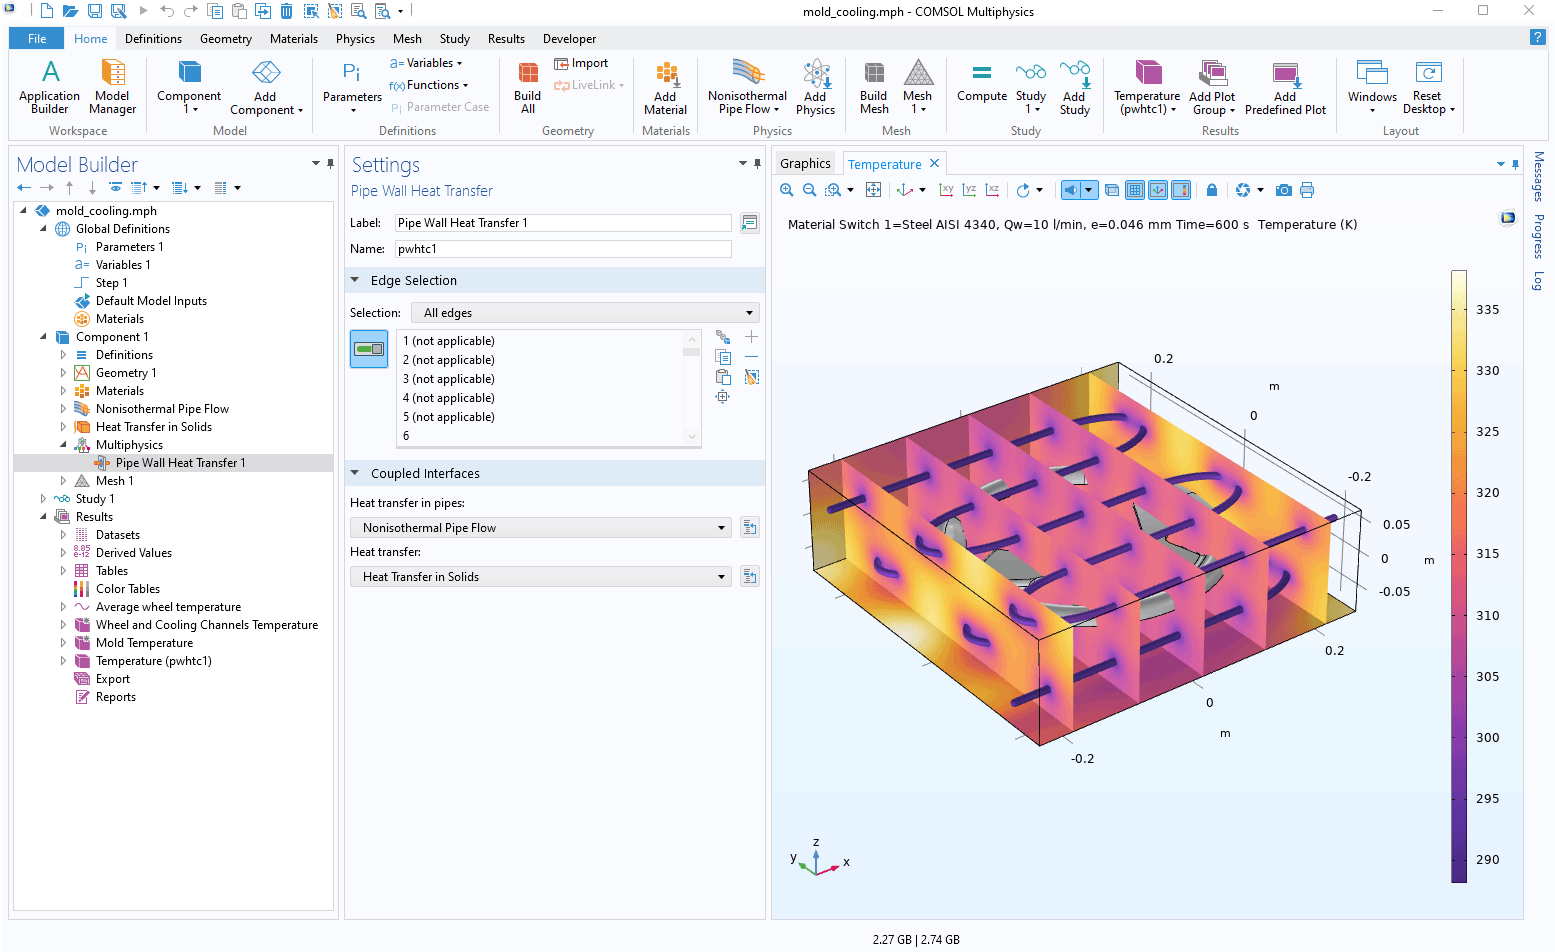 The COMSOL Multiphysics UI showing the Model Builder with the Pipe Wall Heat Transfer node highlighted, the corresponding Settings window, and a mold cooling model in the Graphics window.